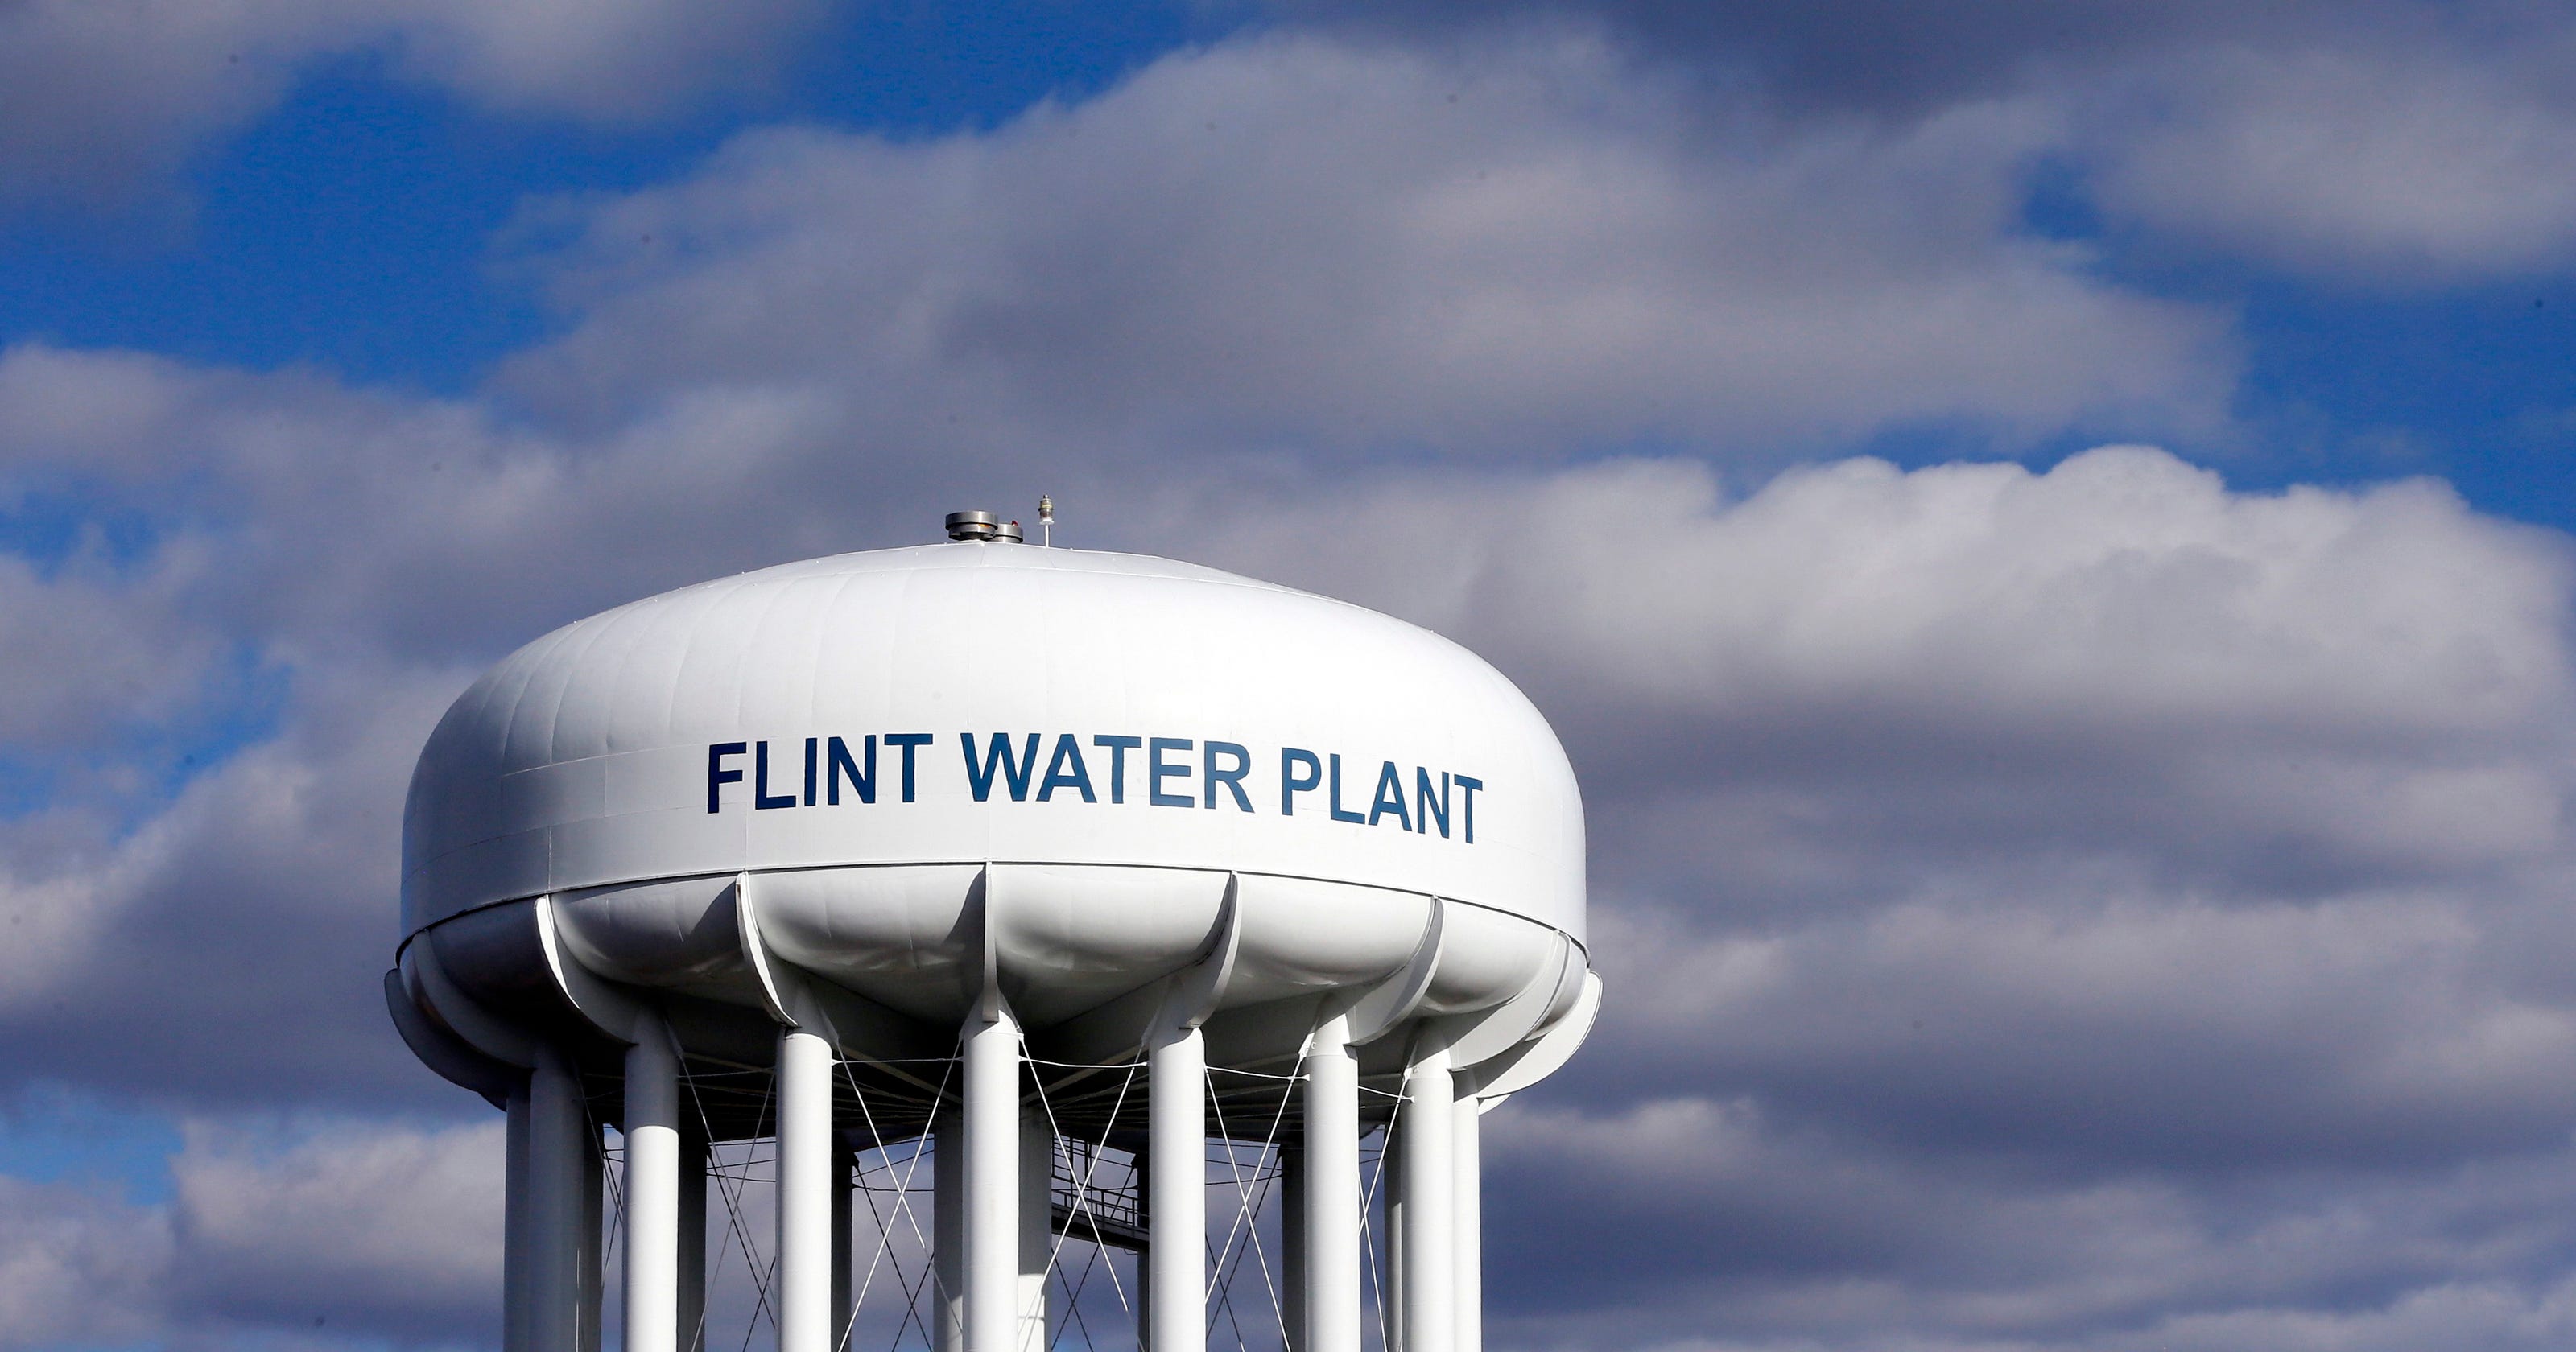 Judge dismisses state's negligence, fraud claims against Flint water consultants - The Detroit News